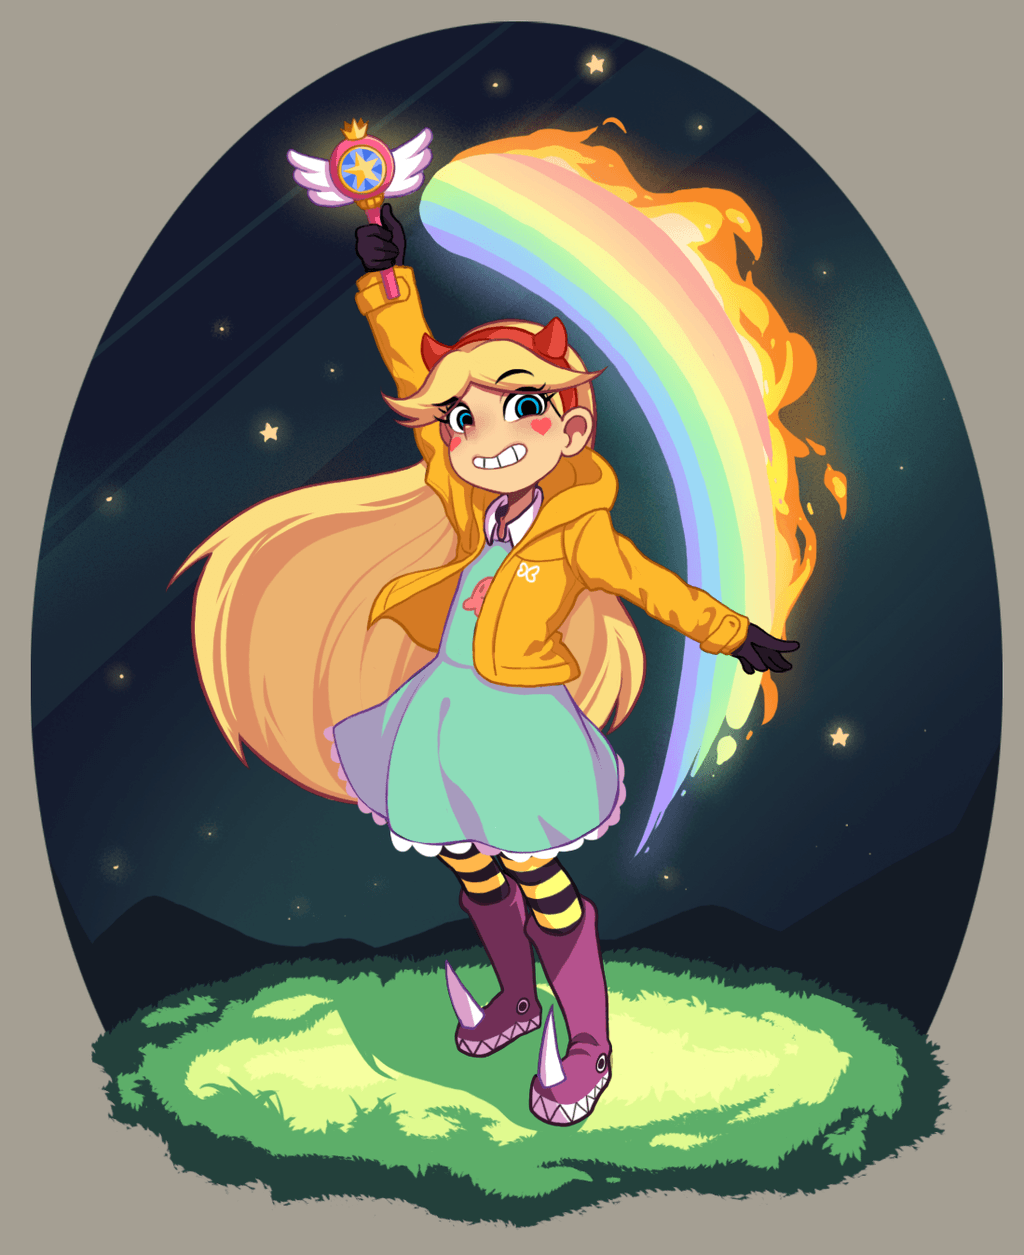 Star vs. the Forces of Evil by eoqudtkdl.